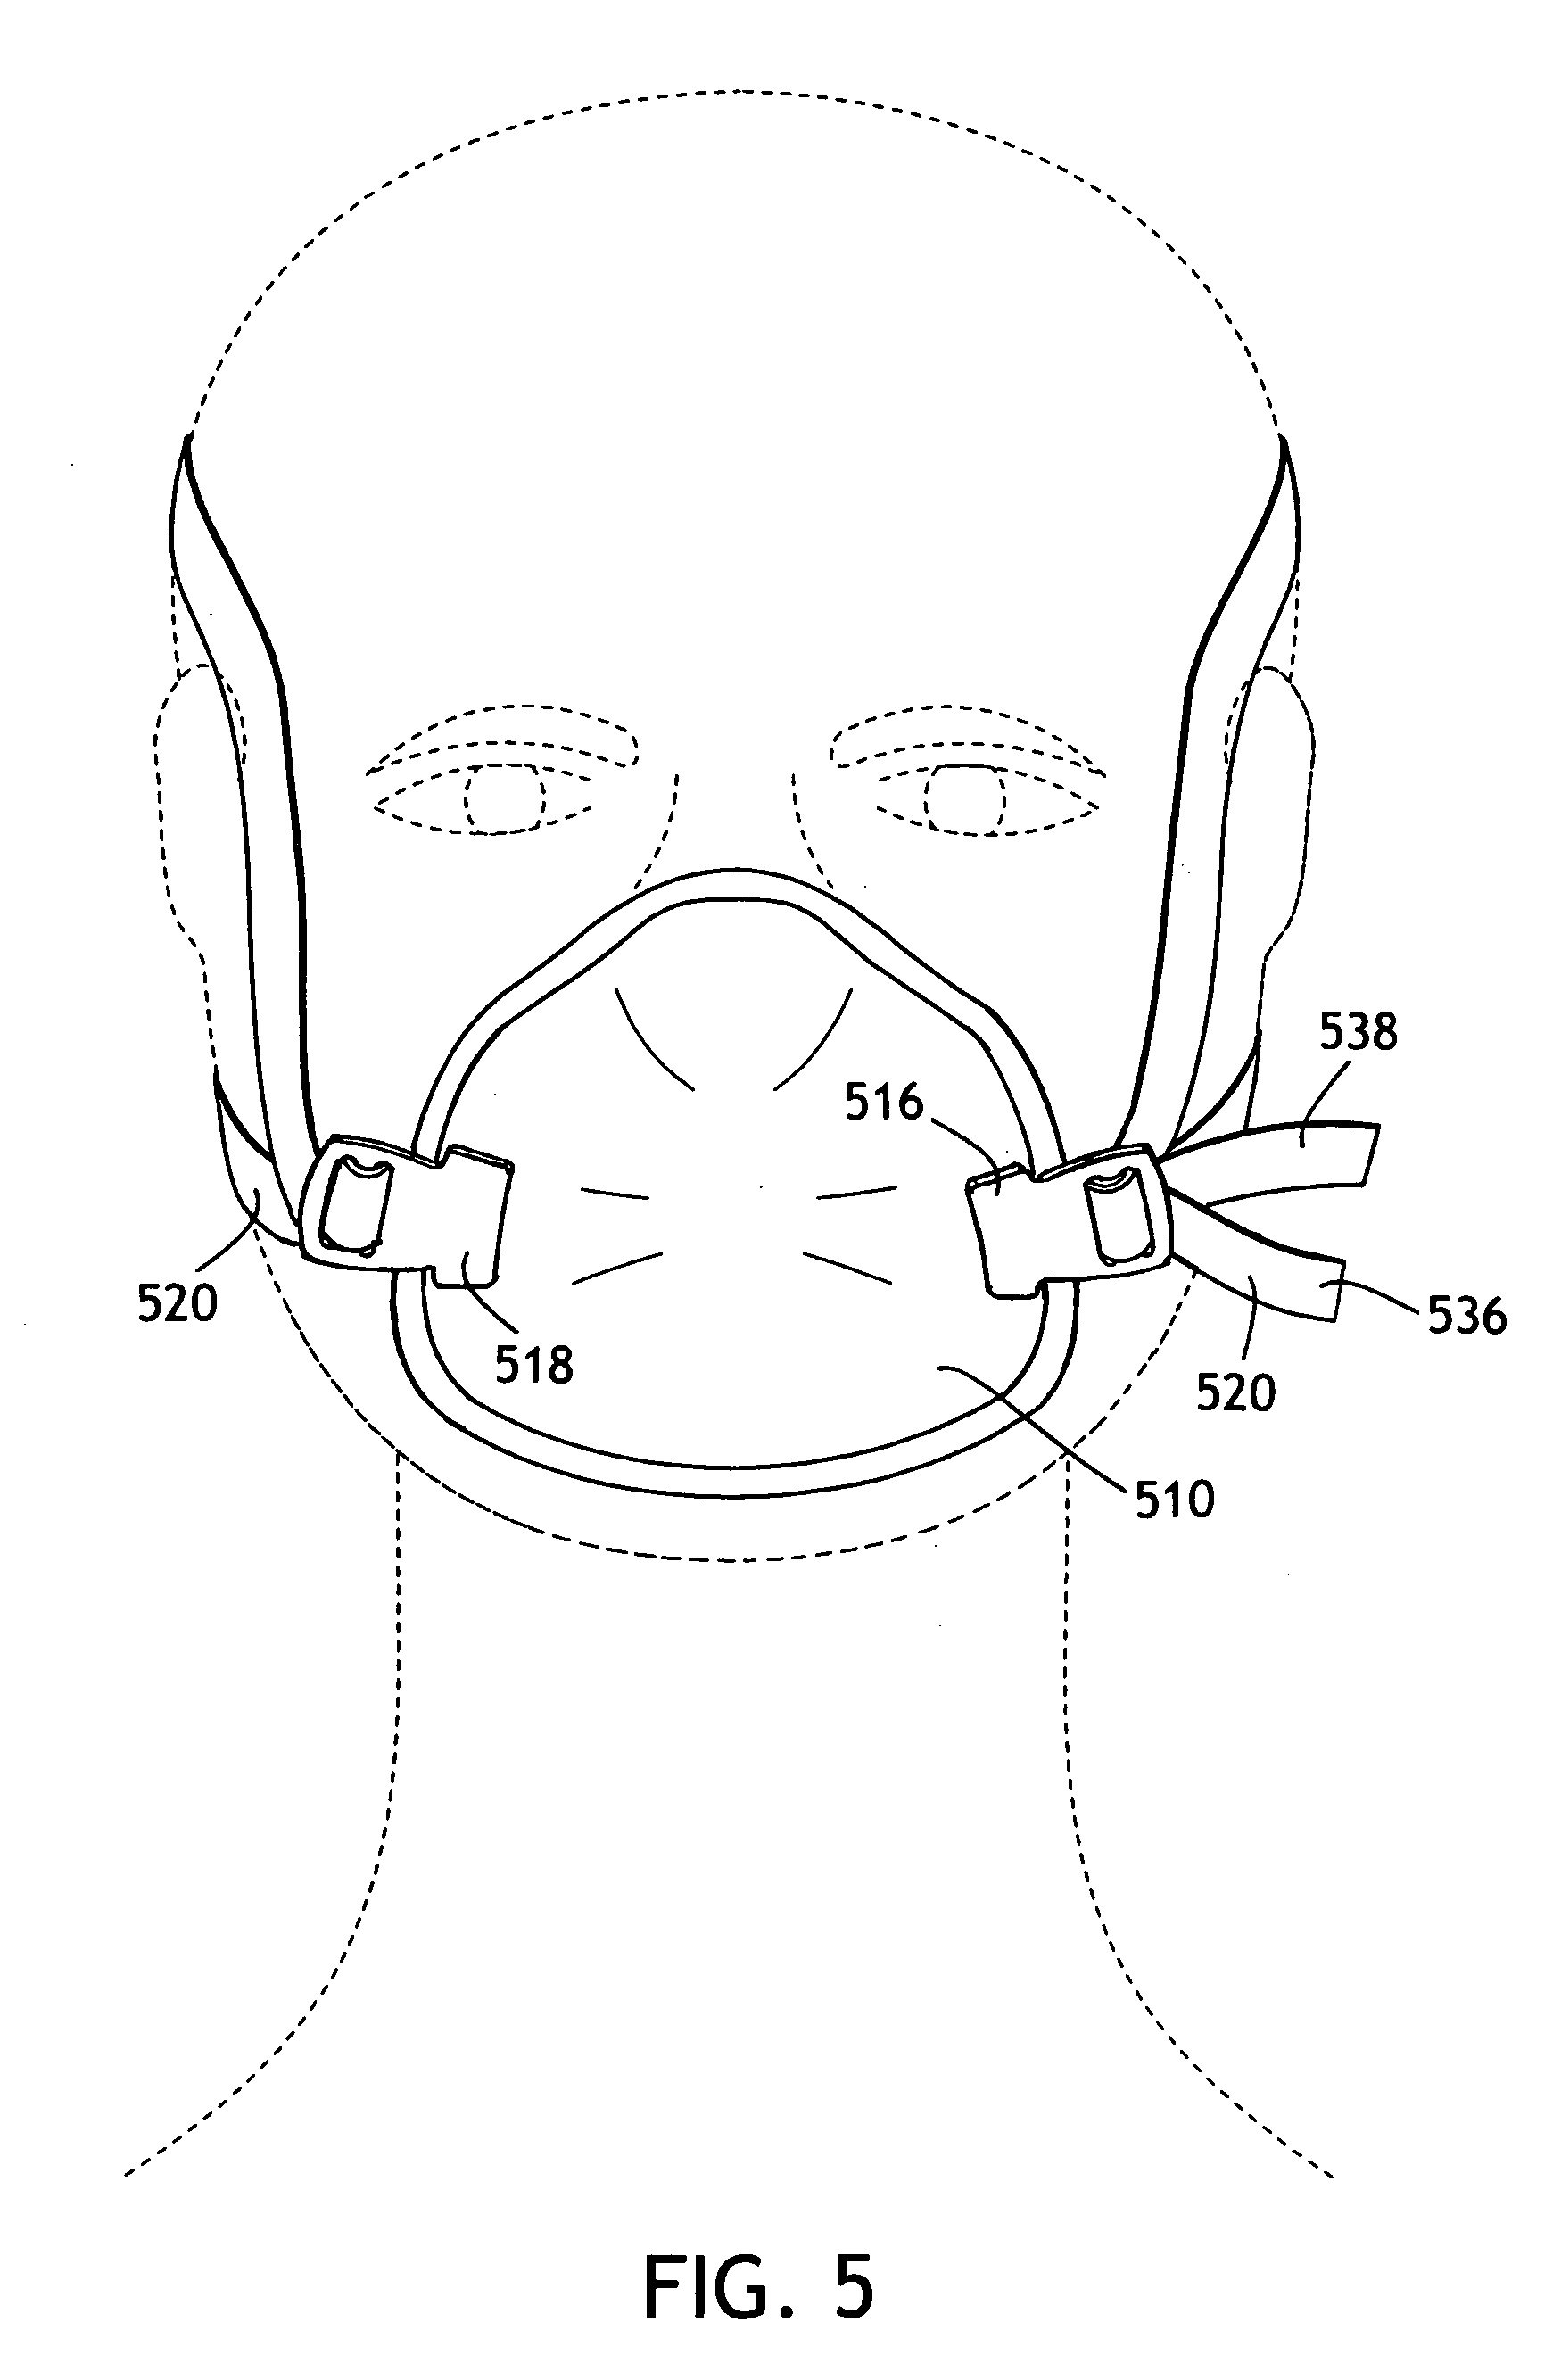 Strap fastening system for a disposable respirator providing improved donning